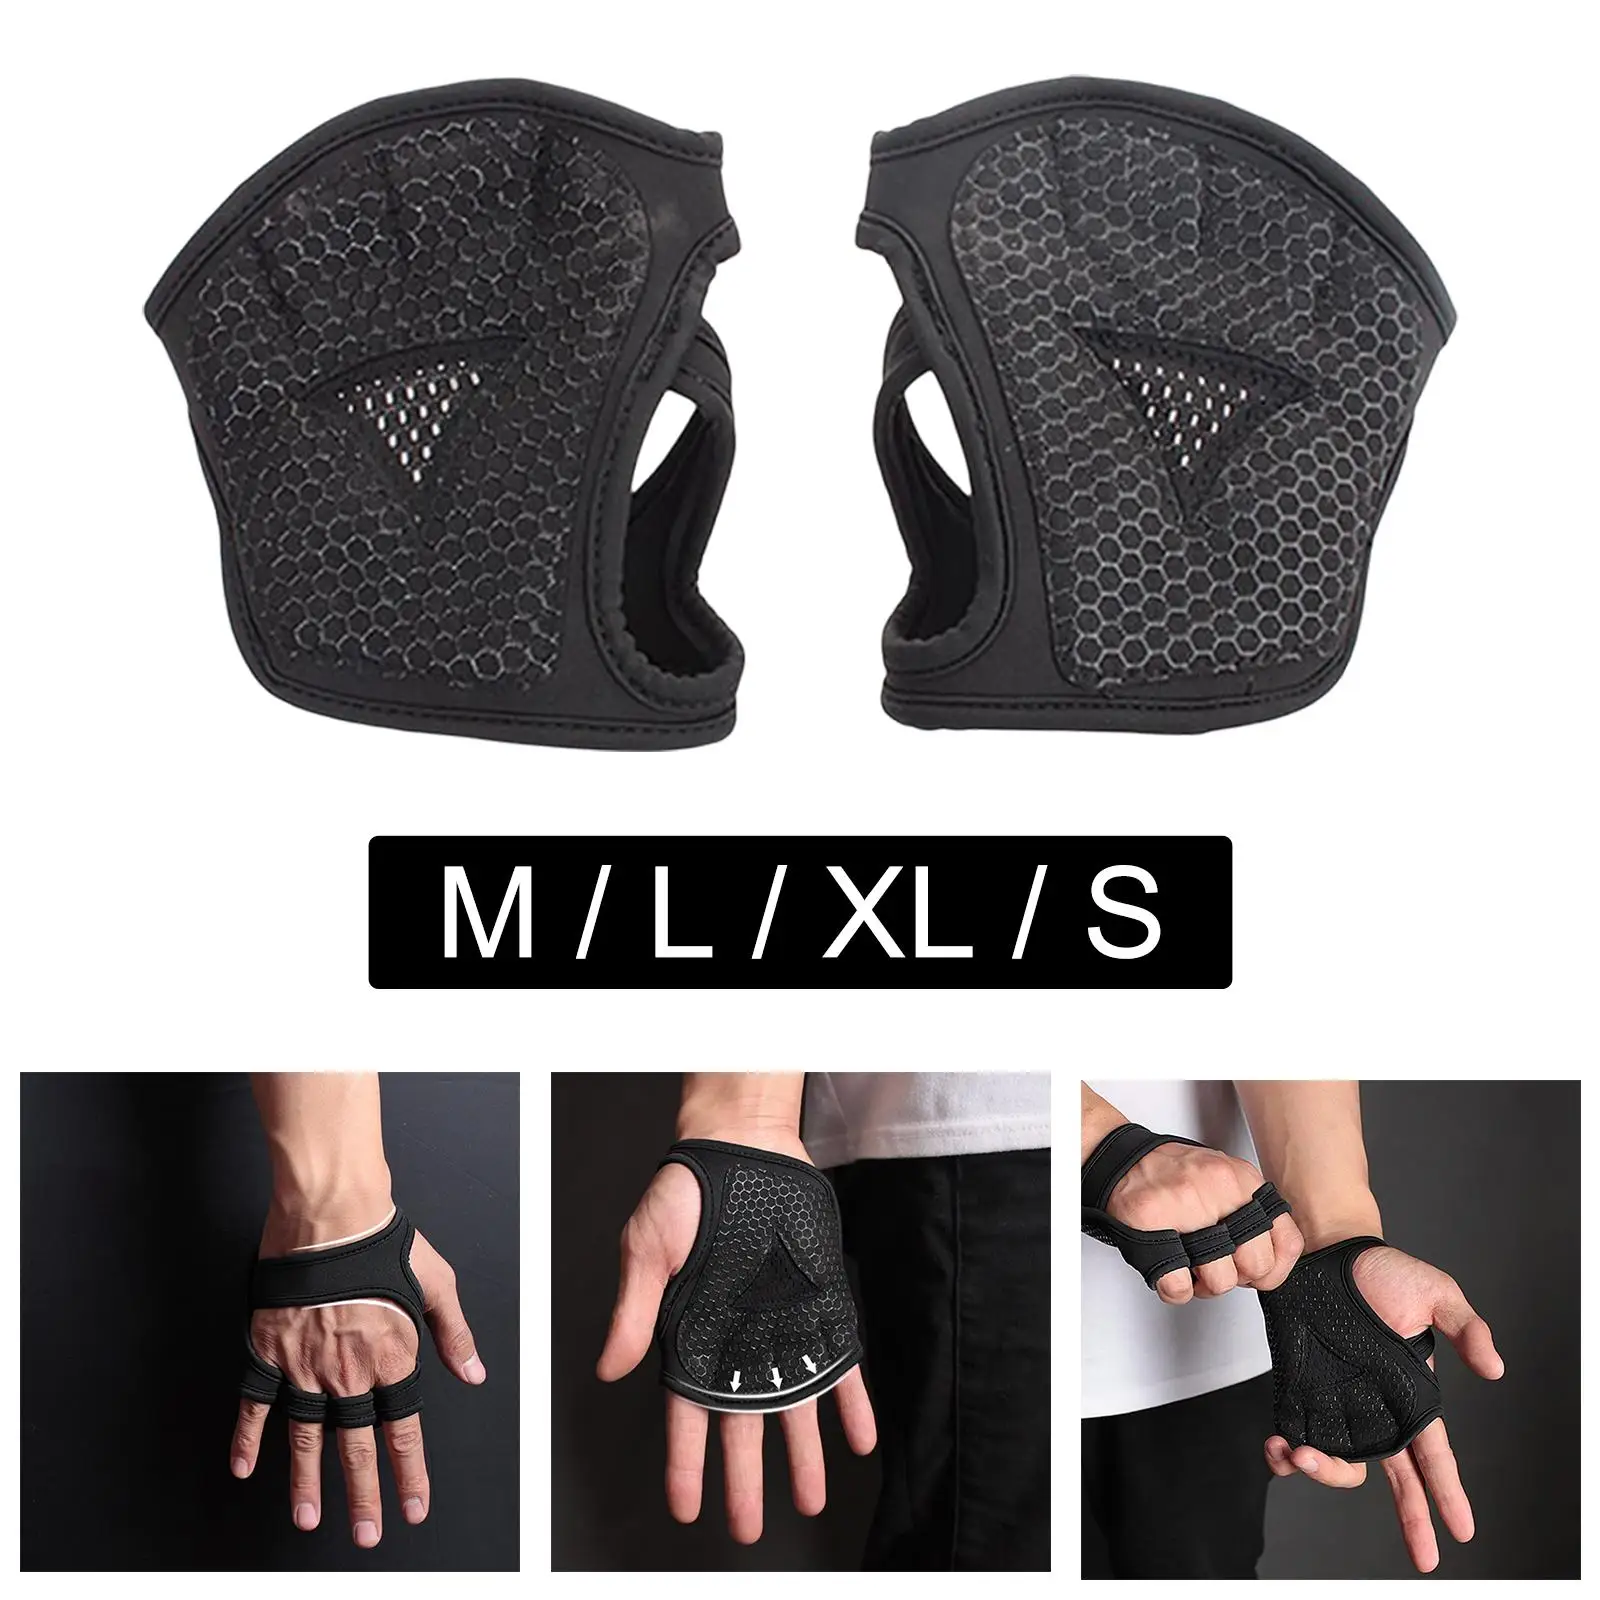 Workout Gloves Non Slip Half Finger Gym Exercise Gloves Palm Protection Men and Women Weight Lifting Gloves for Gym Fitness